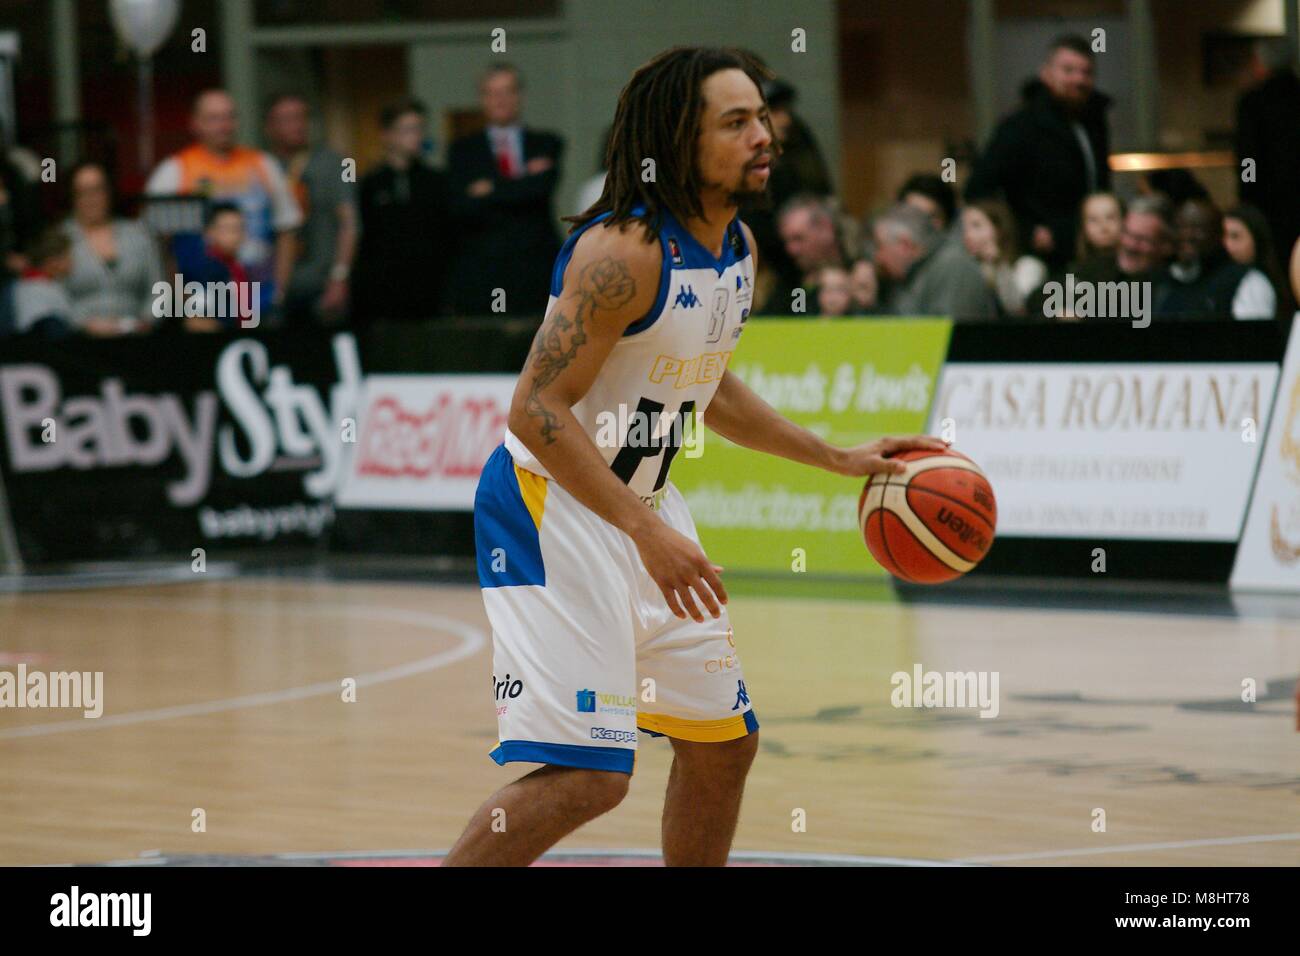 Leicester, England, 17th March 2018. Devan Bailey playing for Cheshire Phoenix against Leicester Riders in a British Basketball League match at Leicester Arena. Credit: Colin Edwards/Alamy Live News. Stock Photo